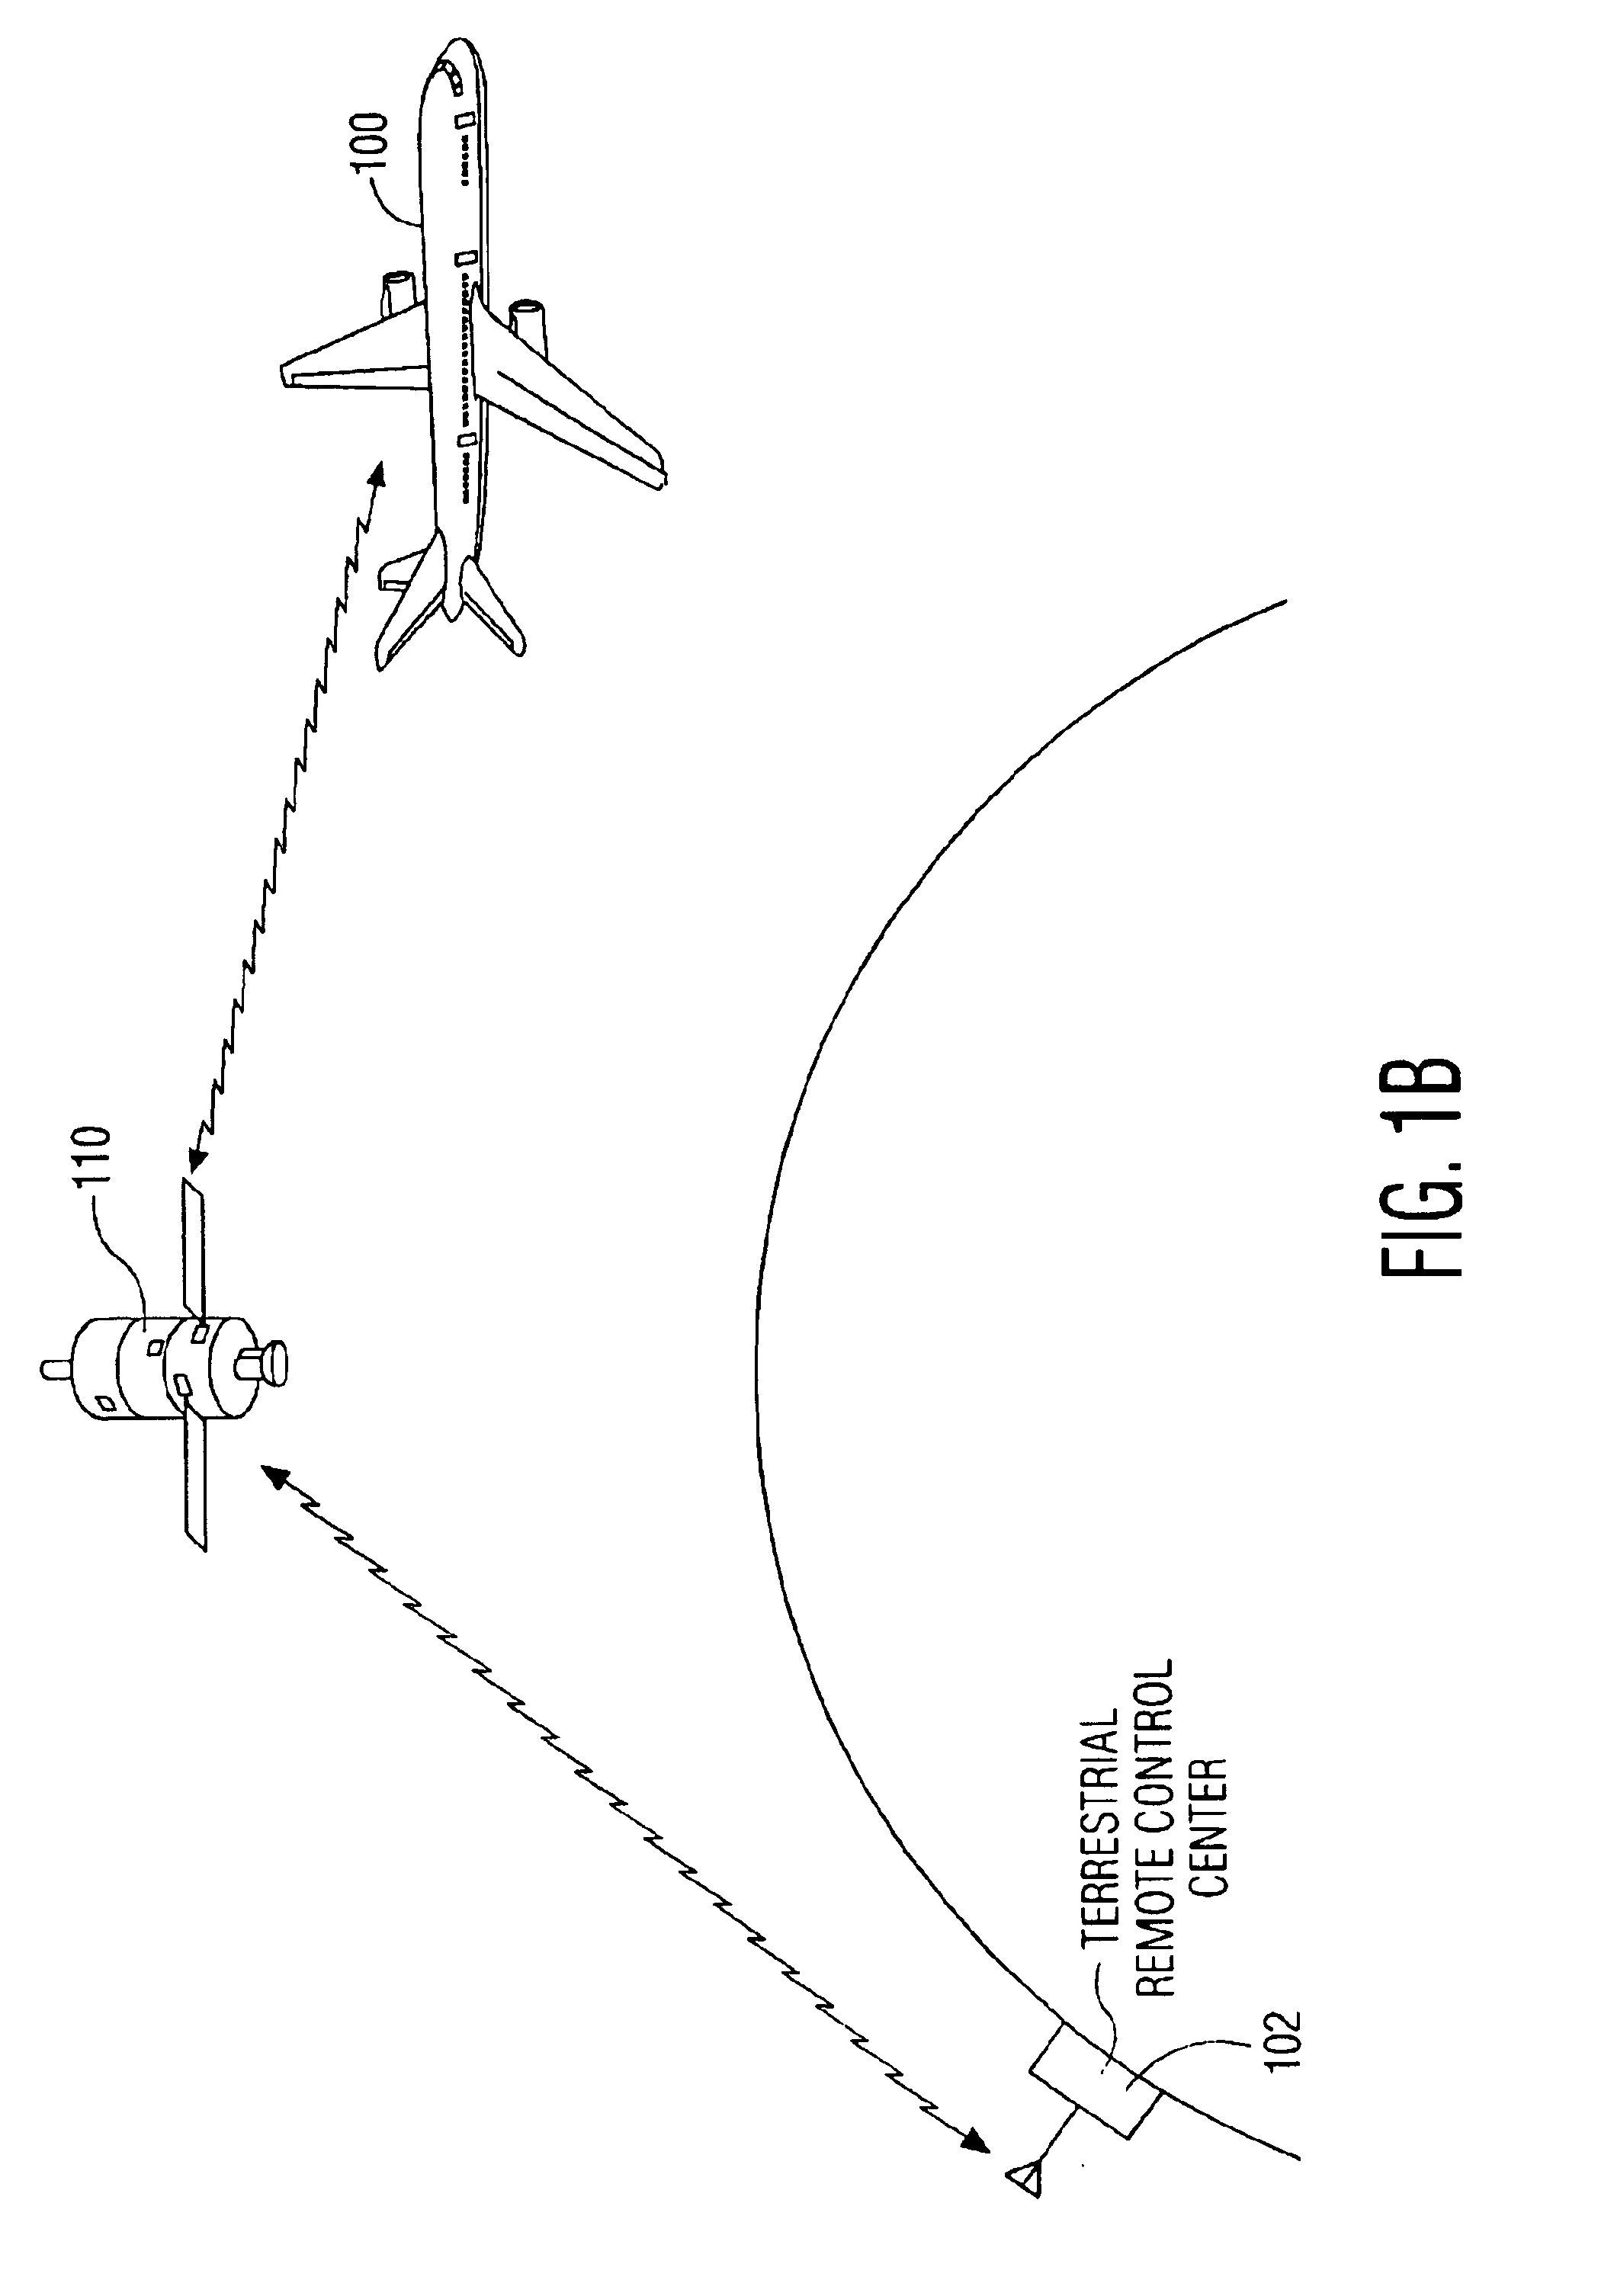 System for assuming and maintaining secure remote control of an aircraft